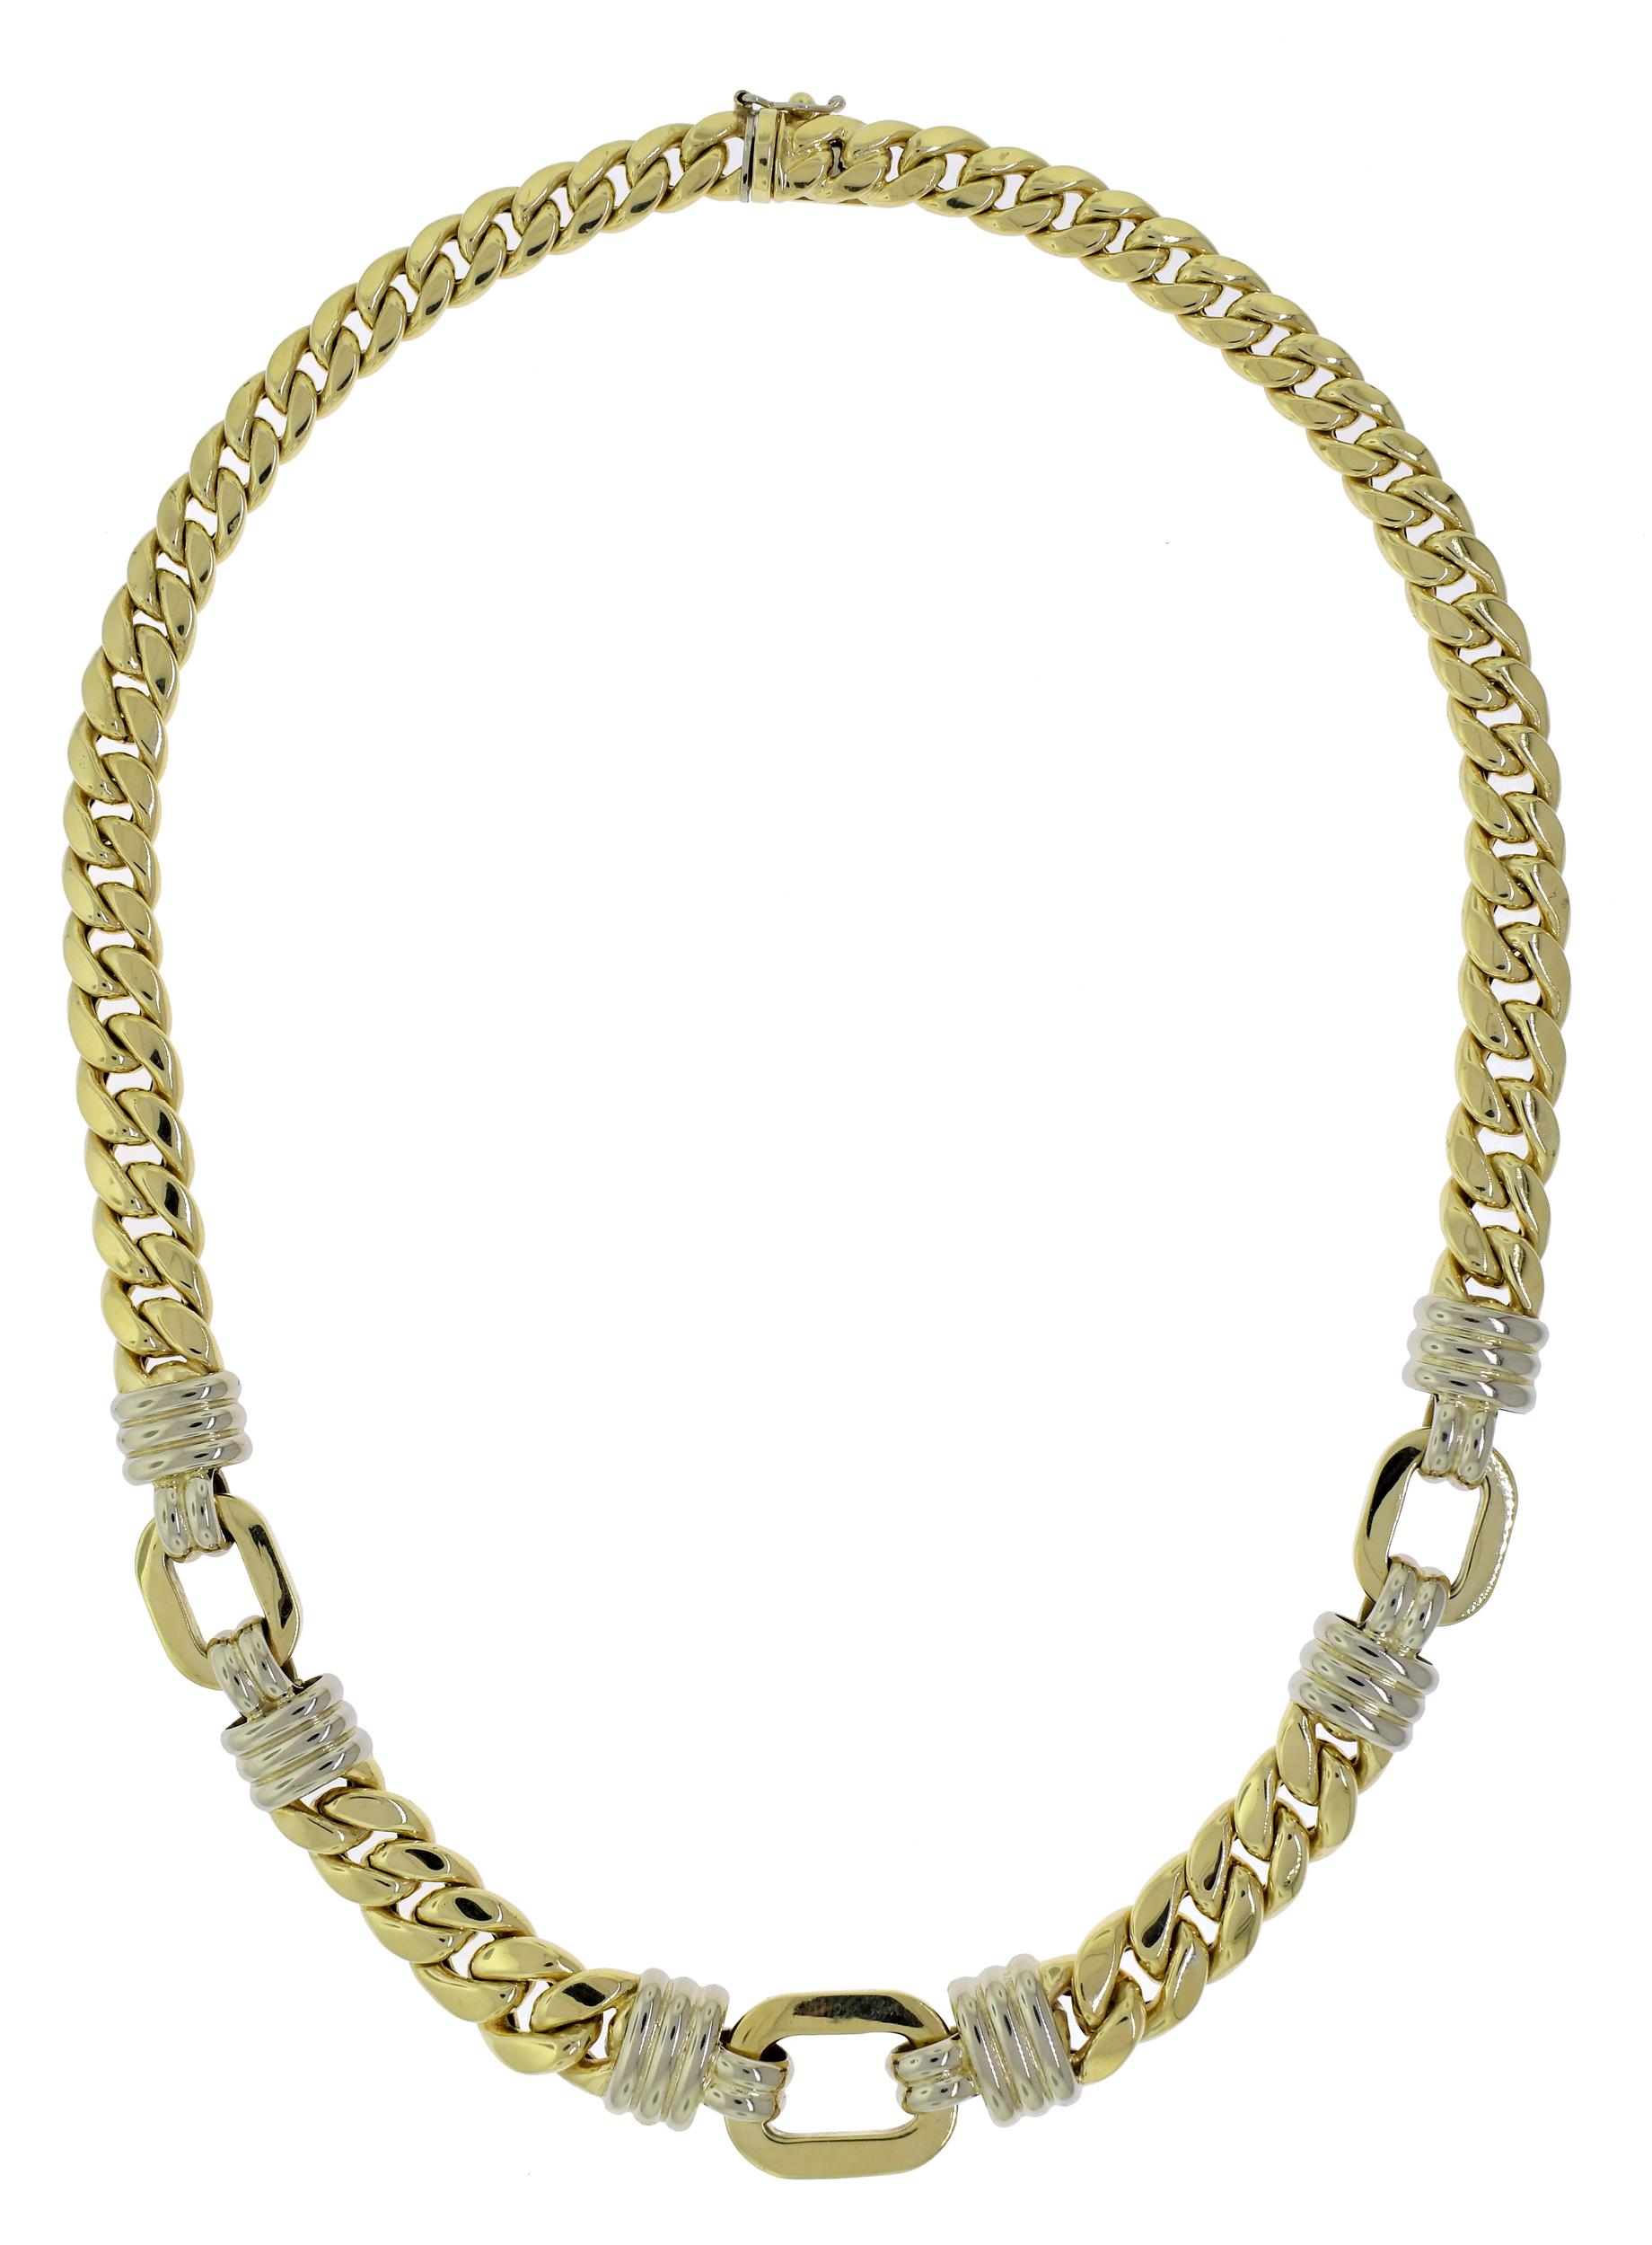 14K YELLOW GOLD MIXED LINK CHAIN  307731